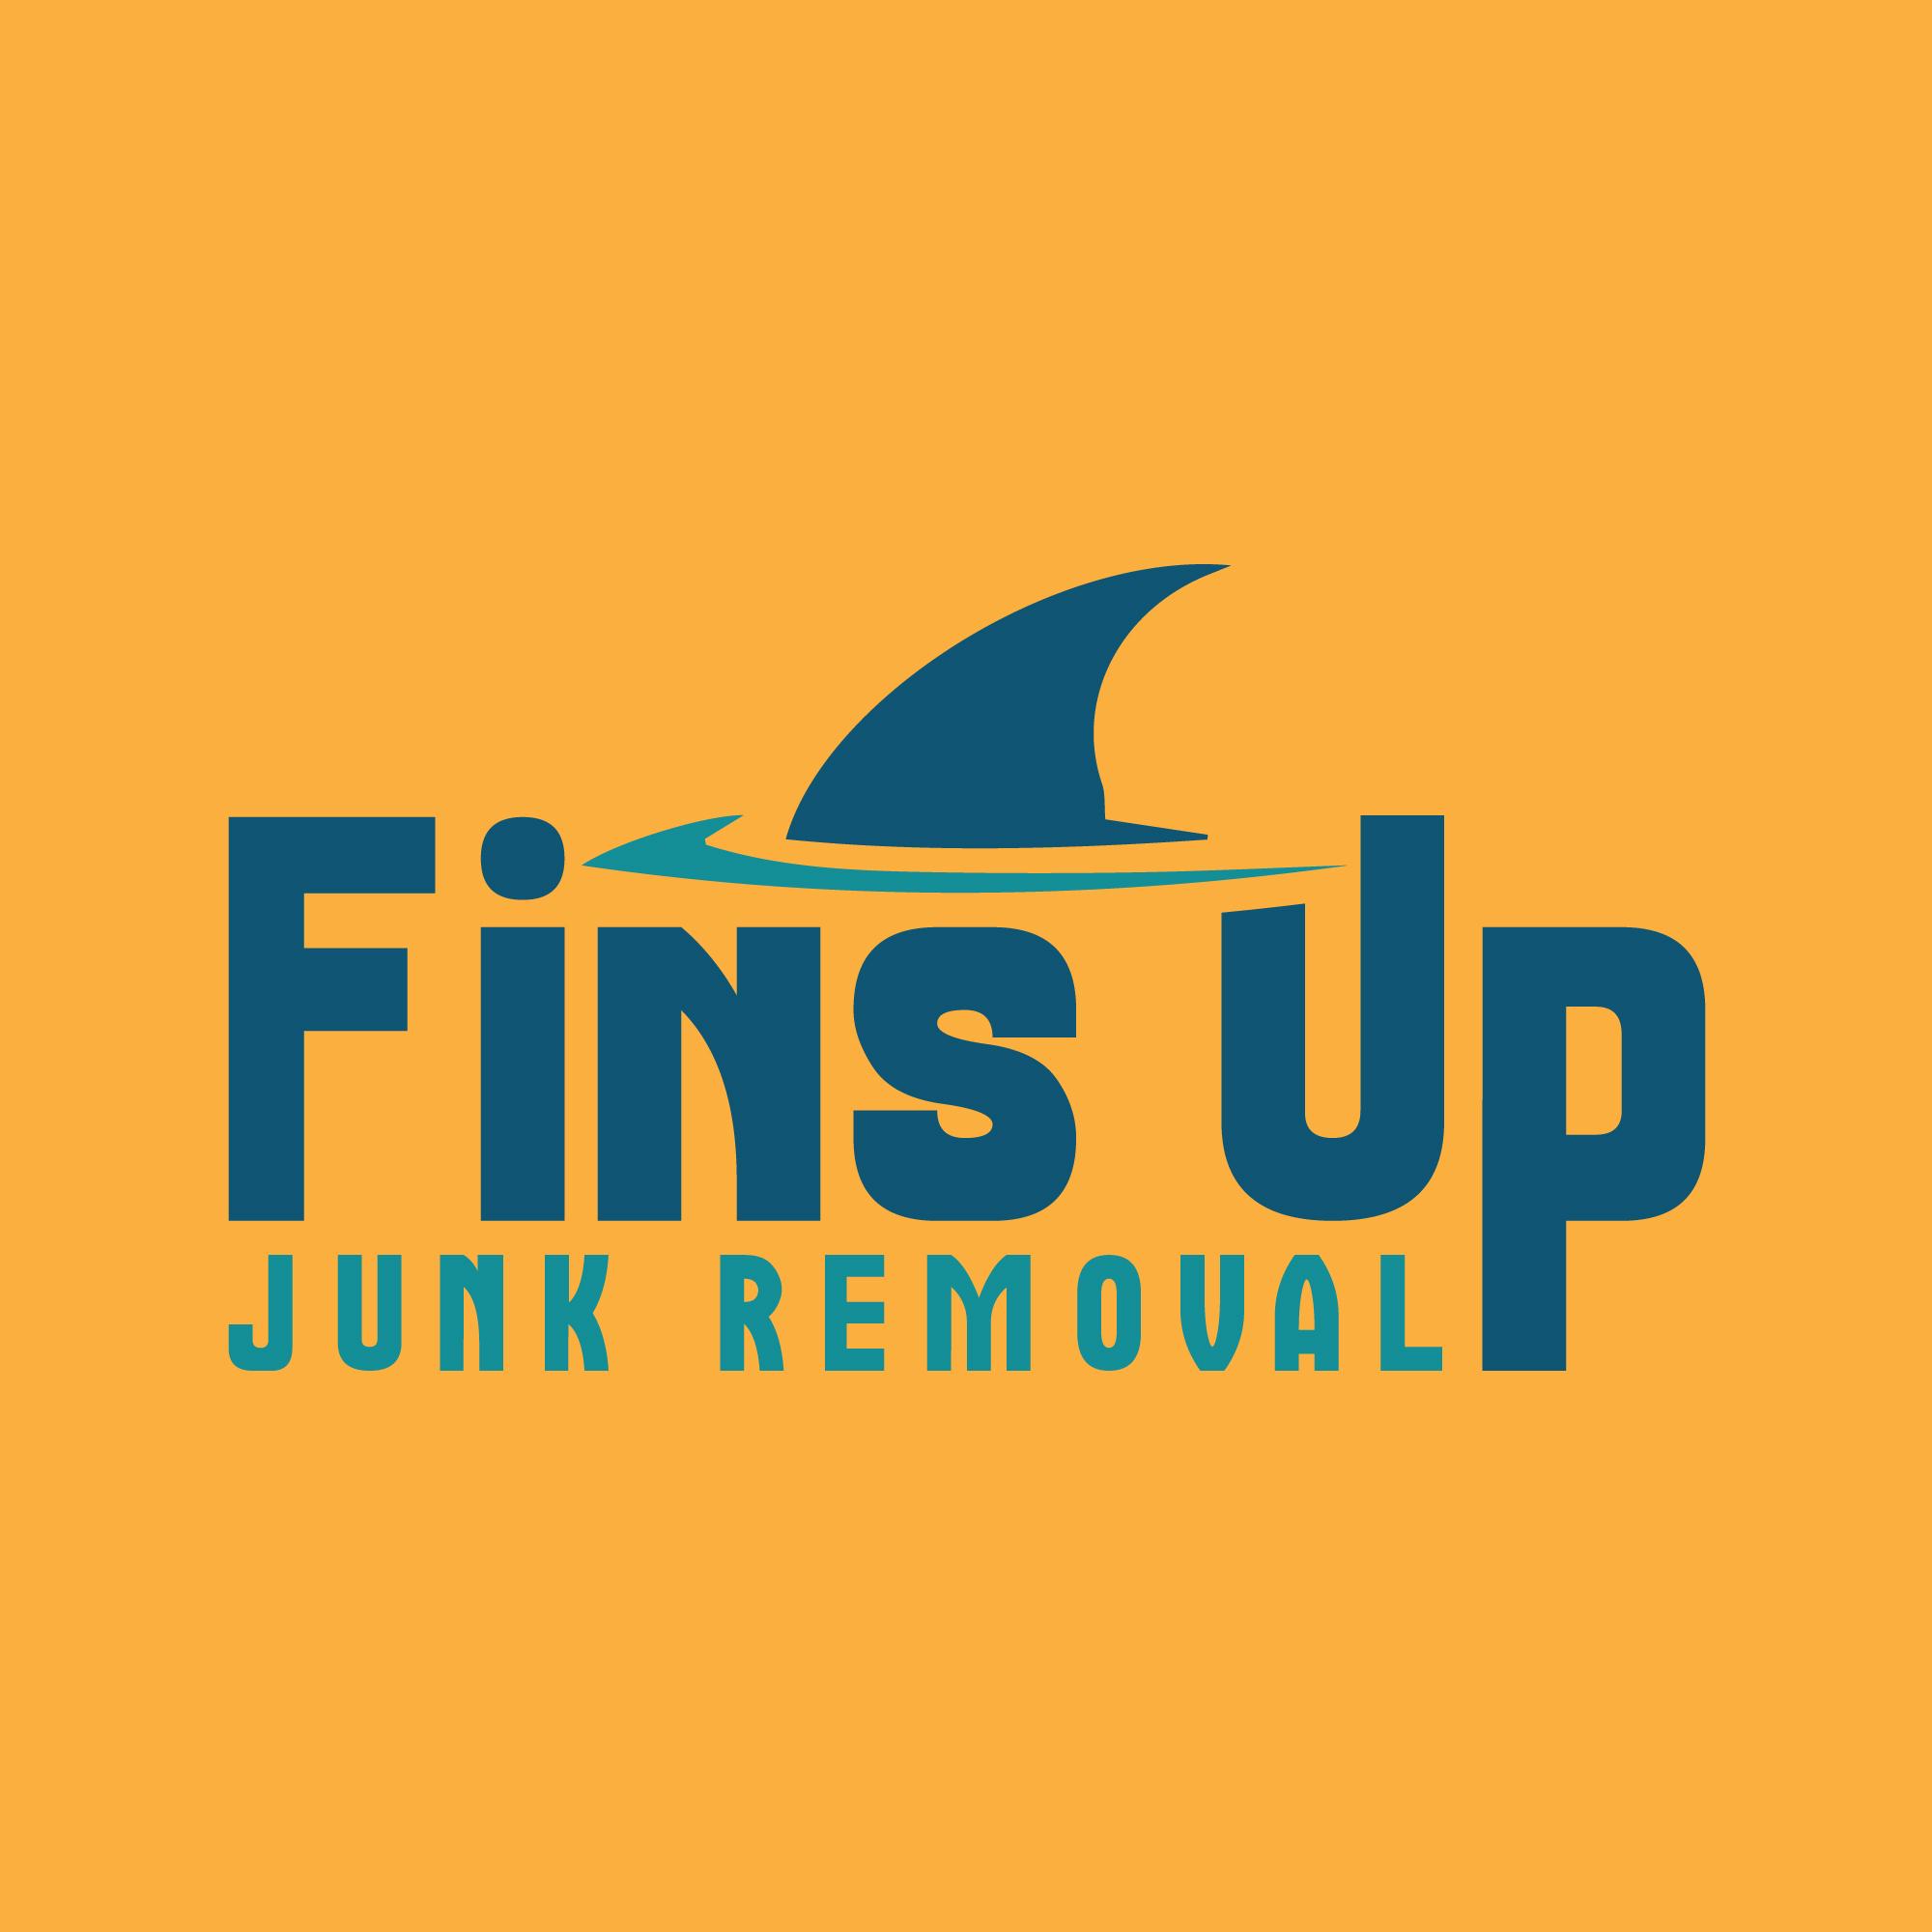 Junk Logo - Fins Up Junk Removal – We remove Junk so you don't have to